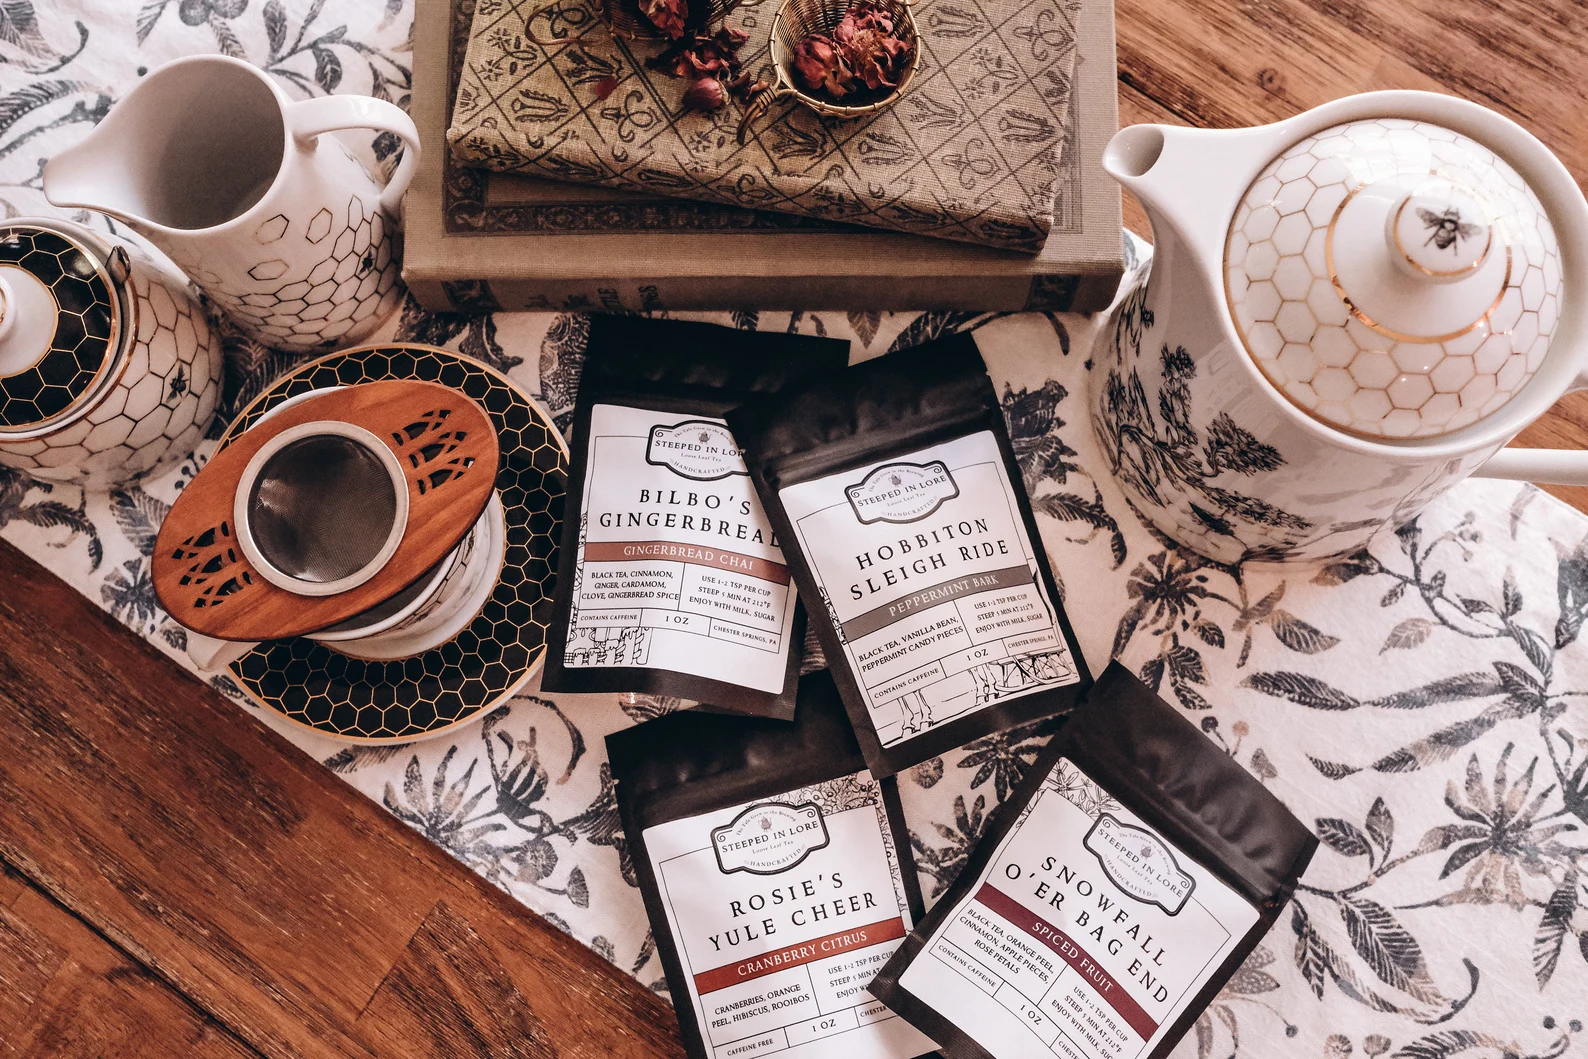 lord of the rings themed tea for fans of tolkien and the hobbit